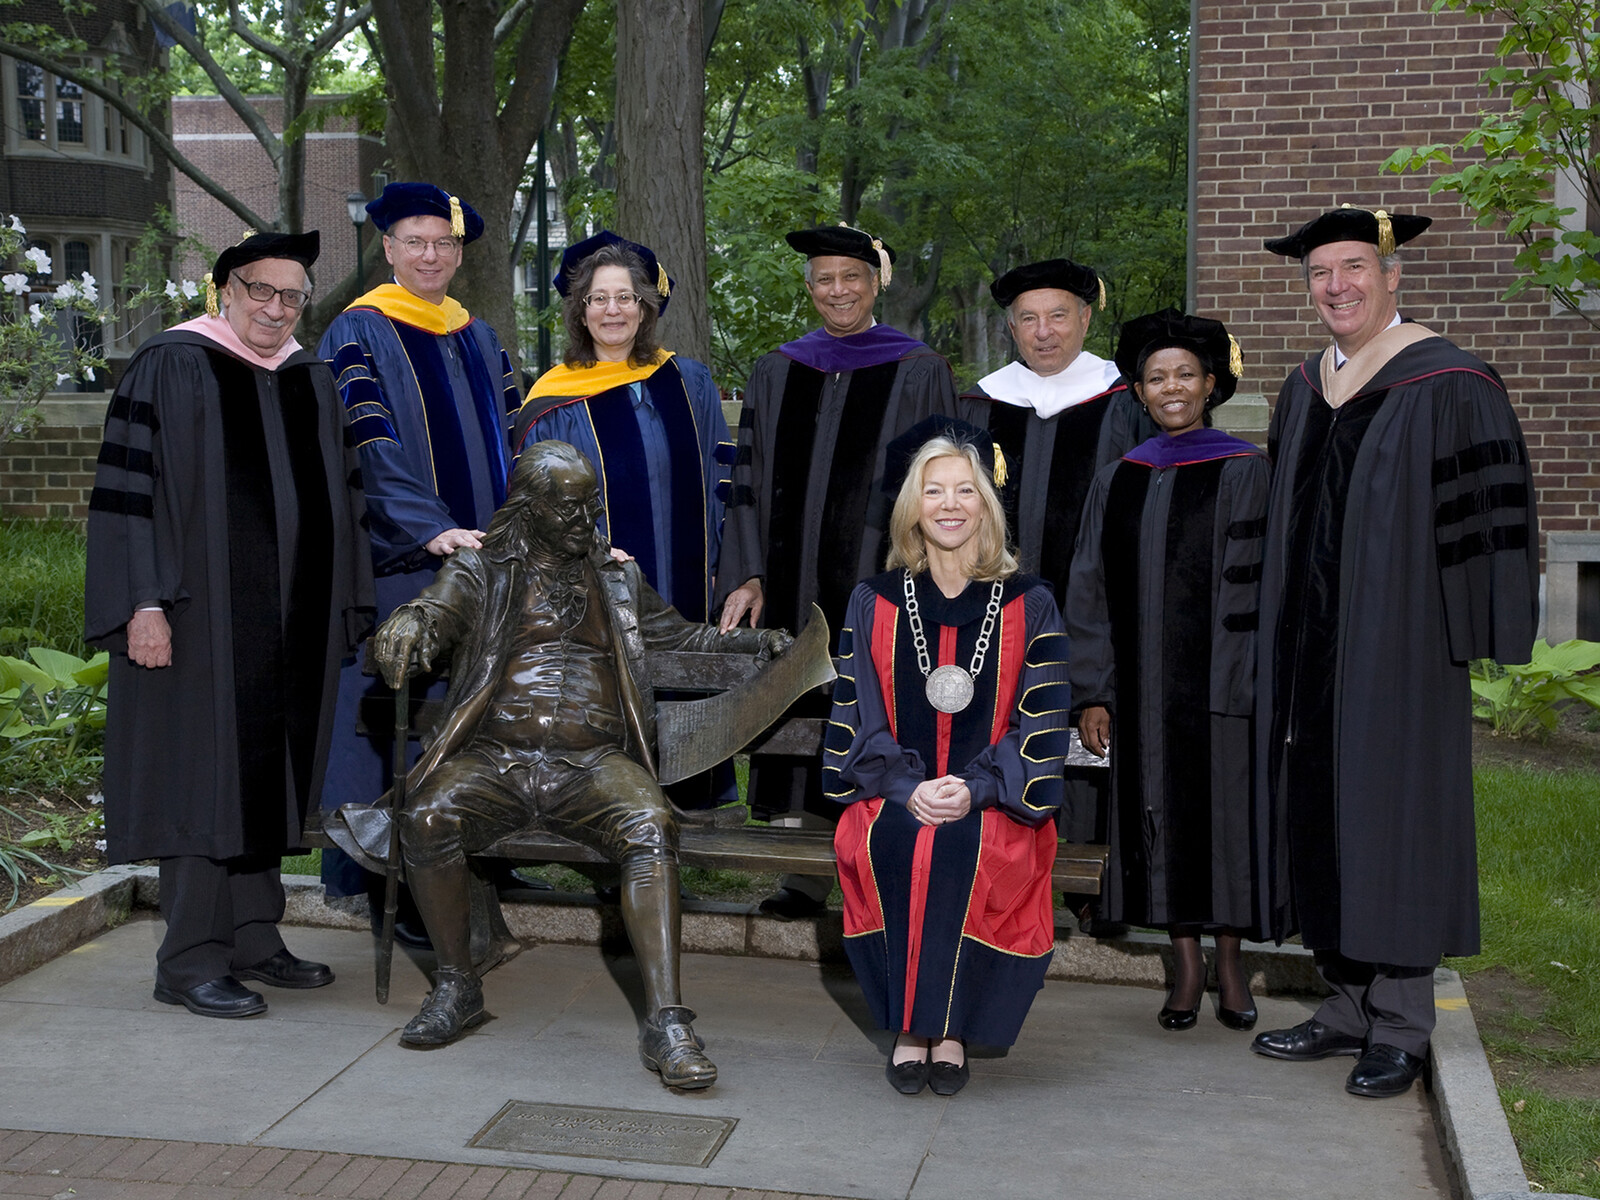 Amy Gutmann and 2009 Penn honorary degree recipients in regalia